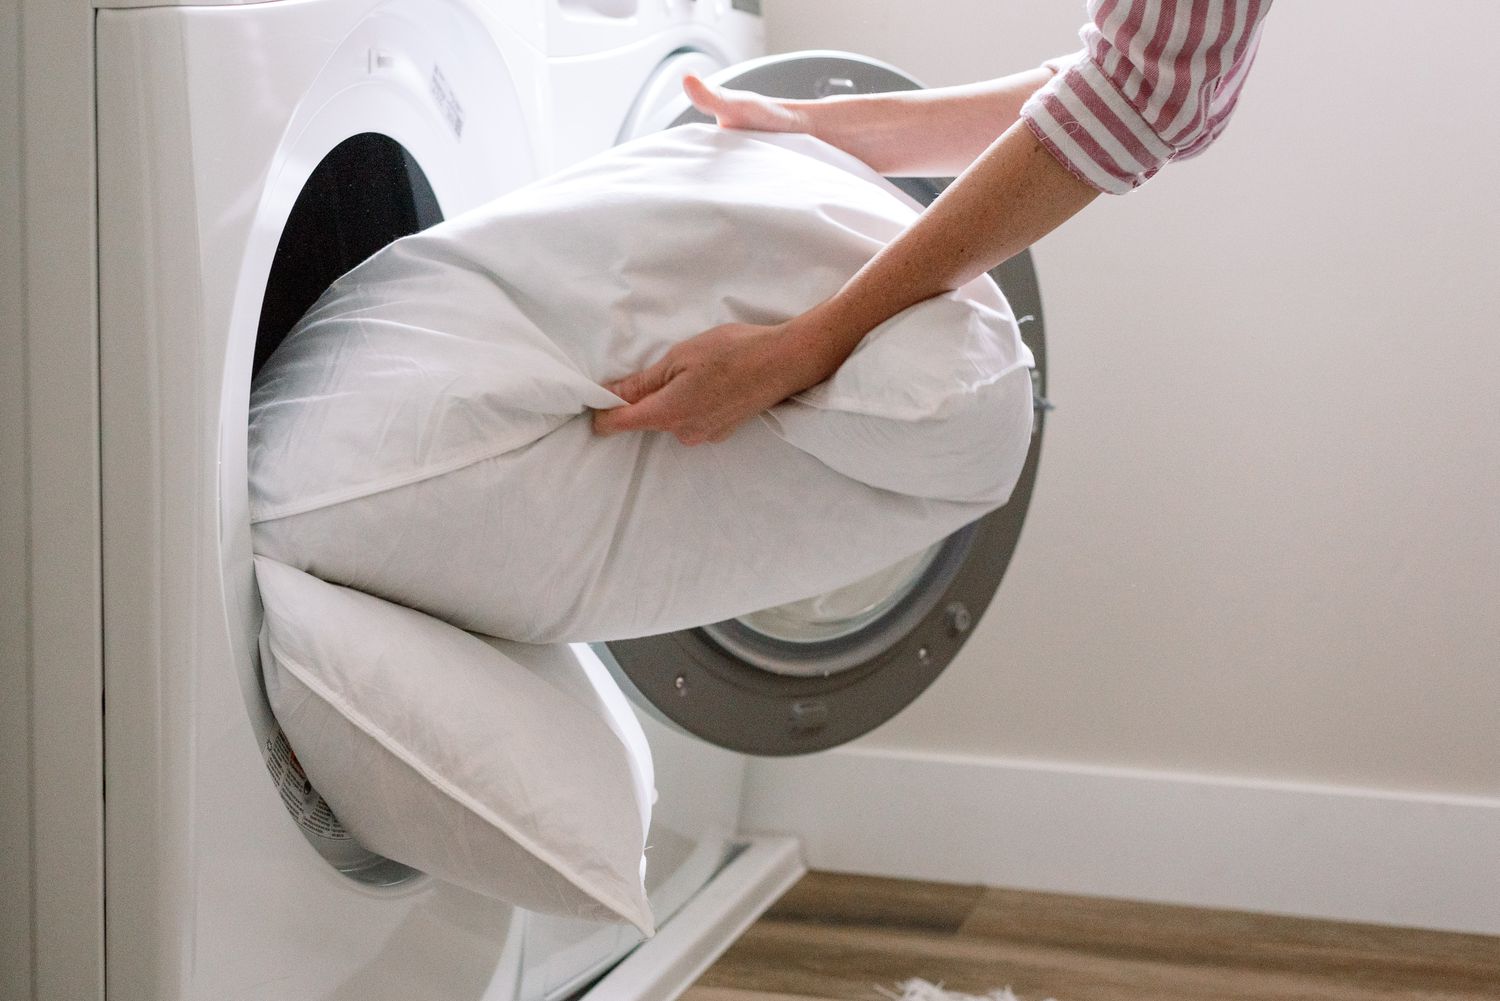 How To Dry Pillows In The Dryer